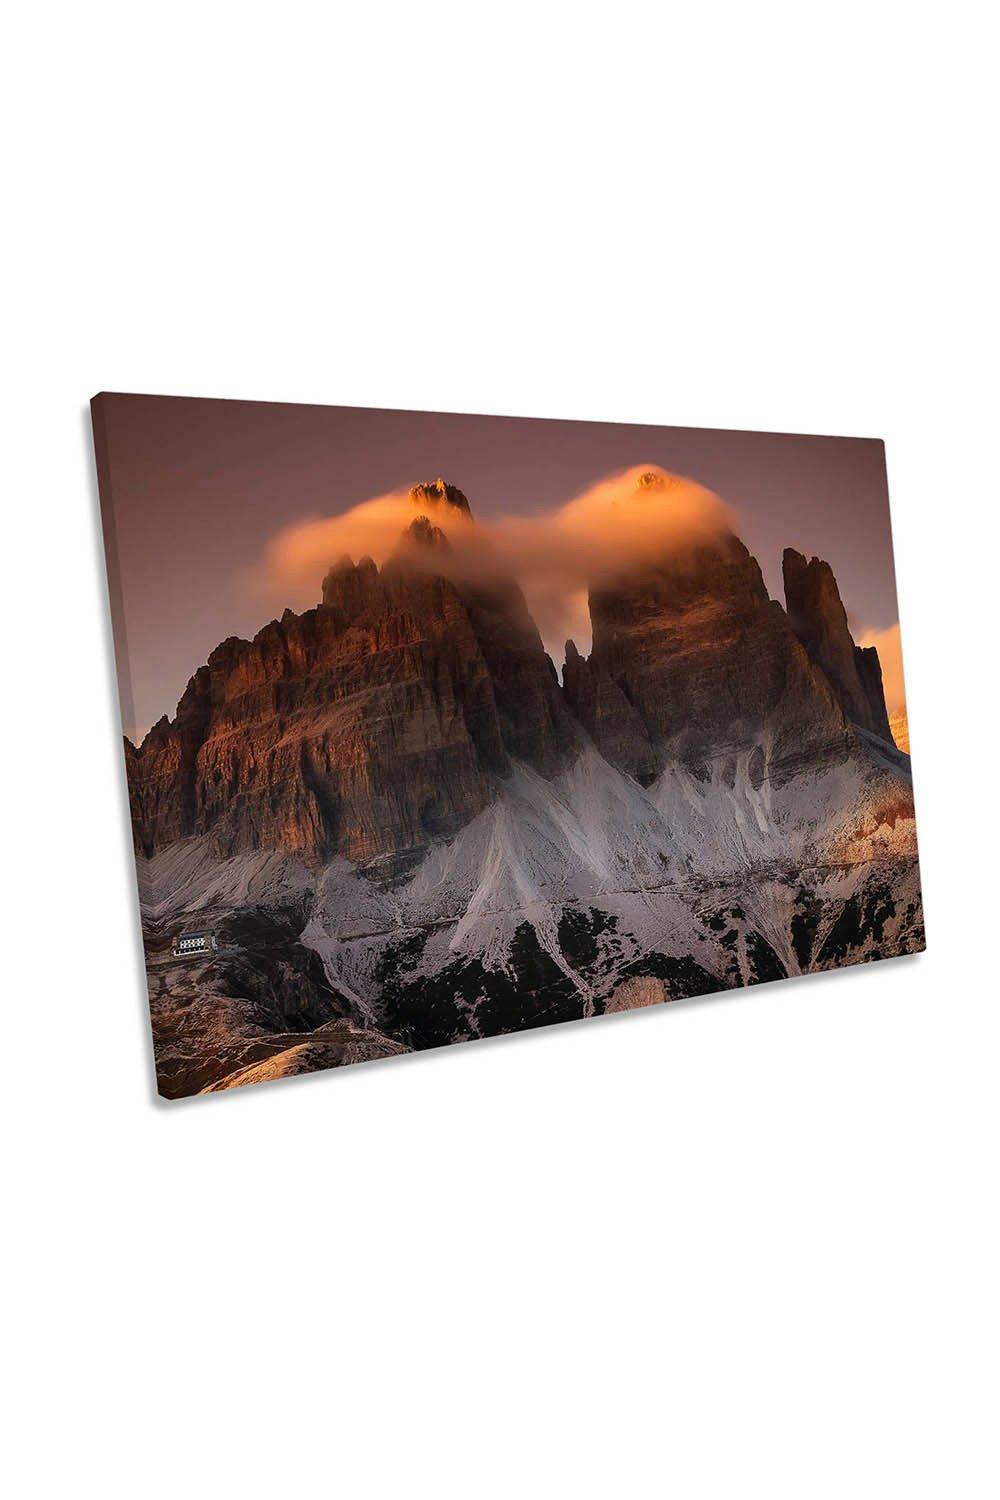 Cotton Candy Clouds Dolomites Mountains Canvas Wall Art Picture Print